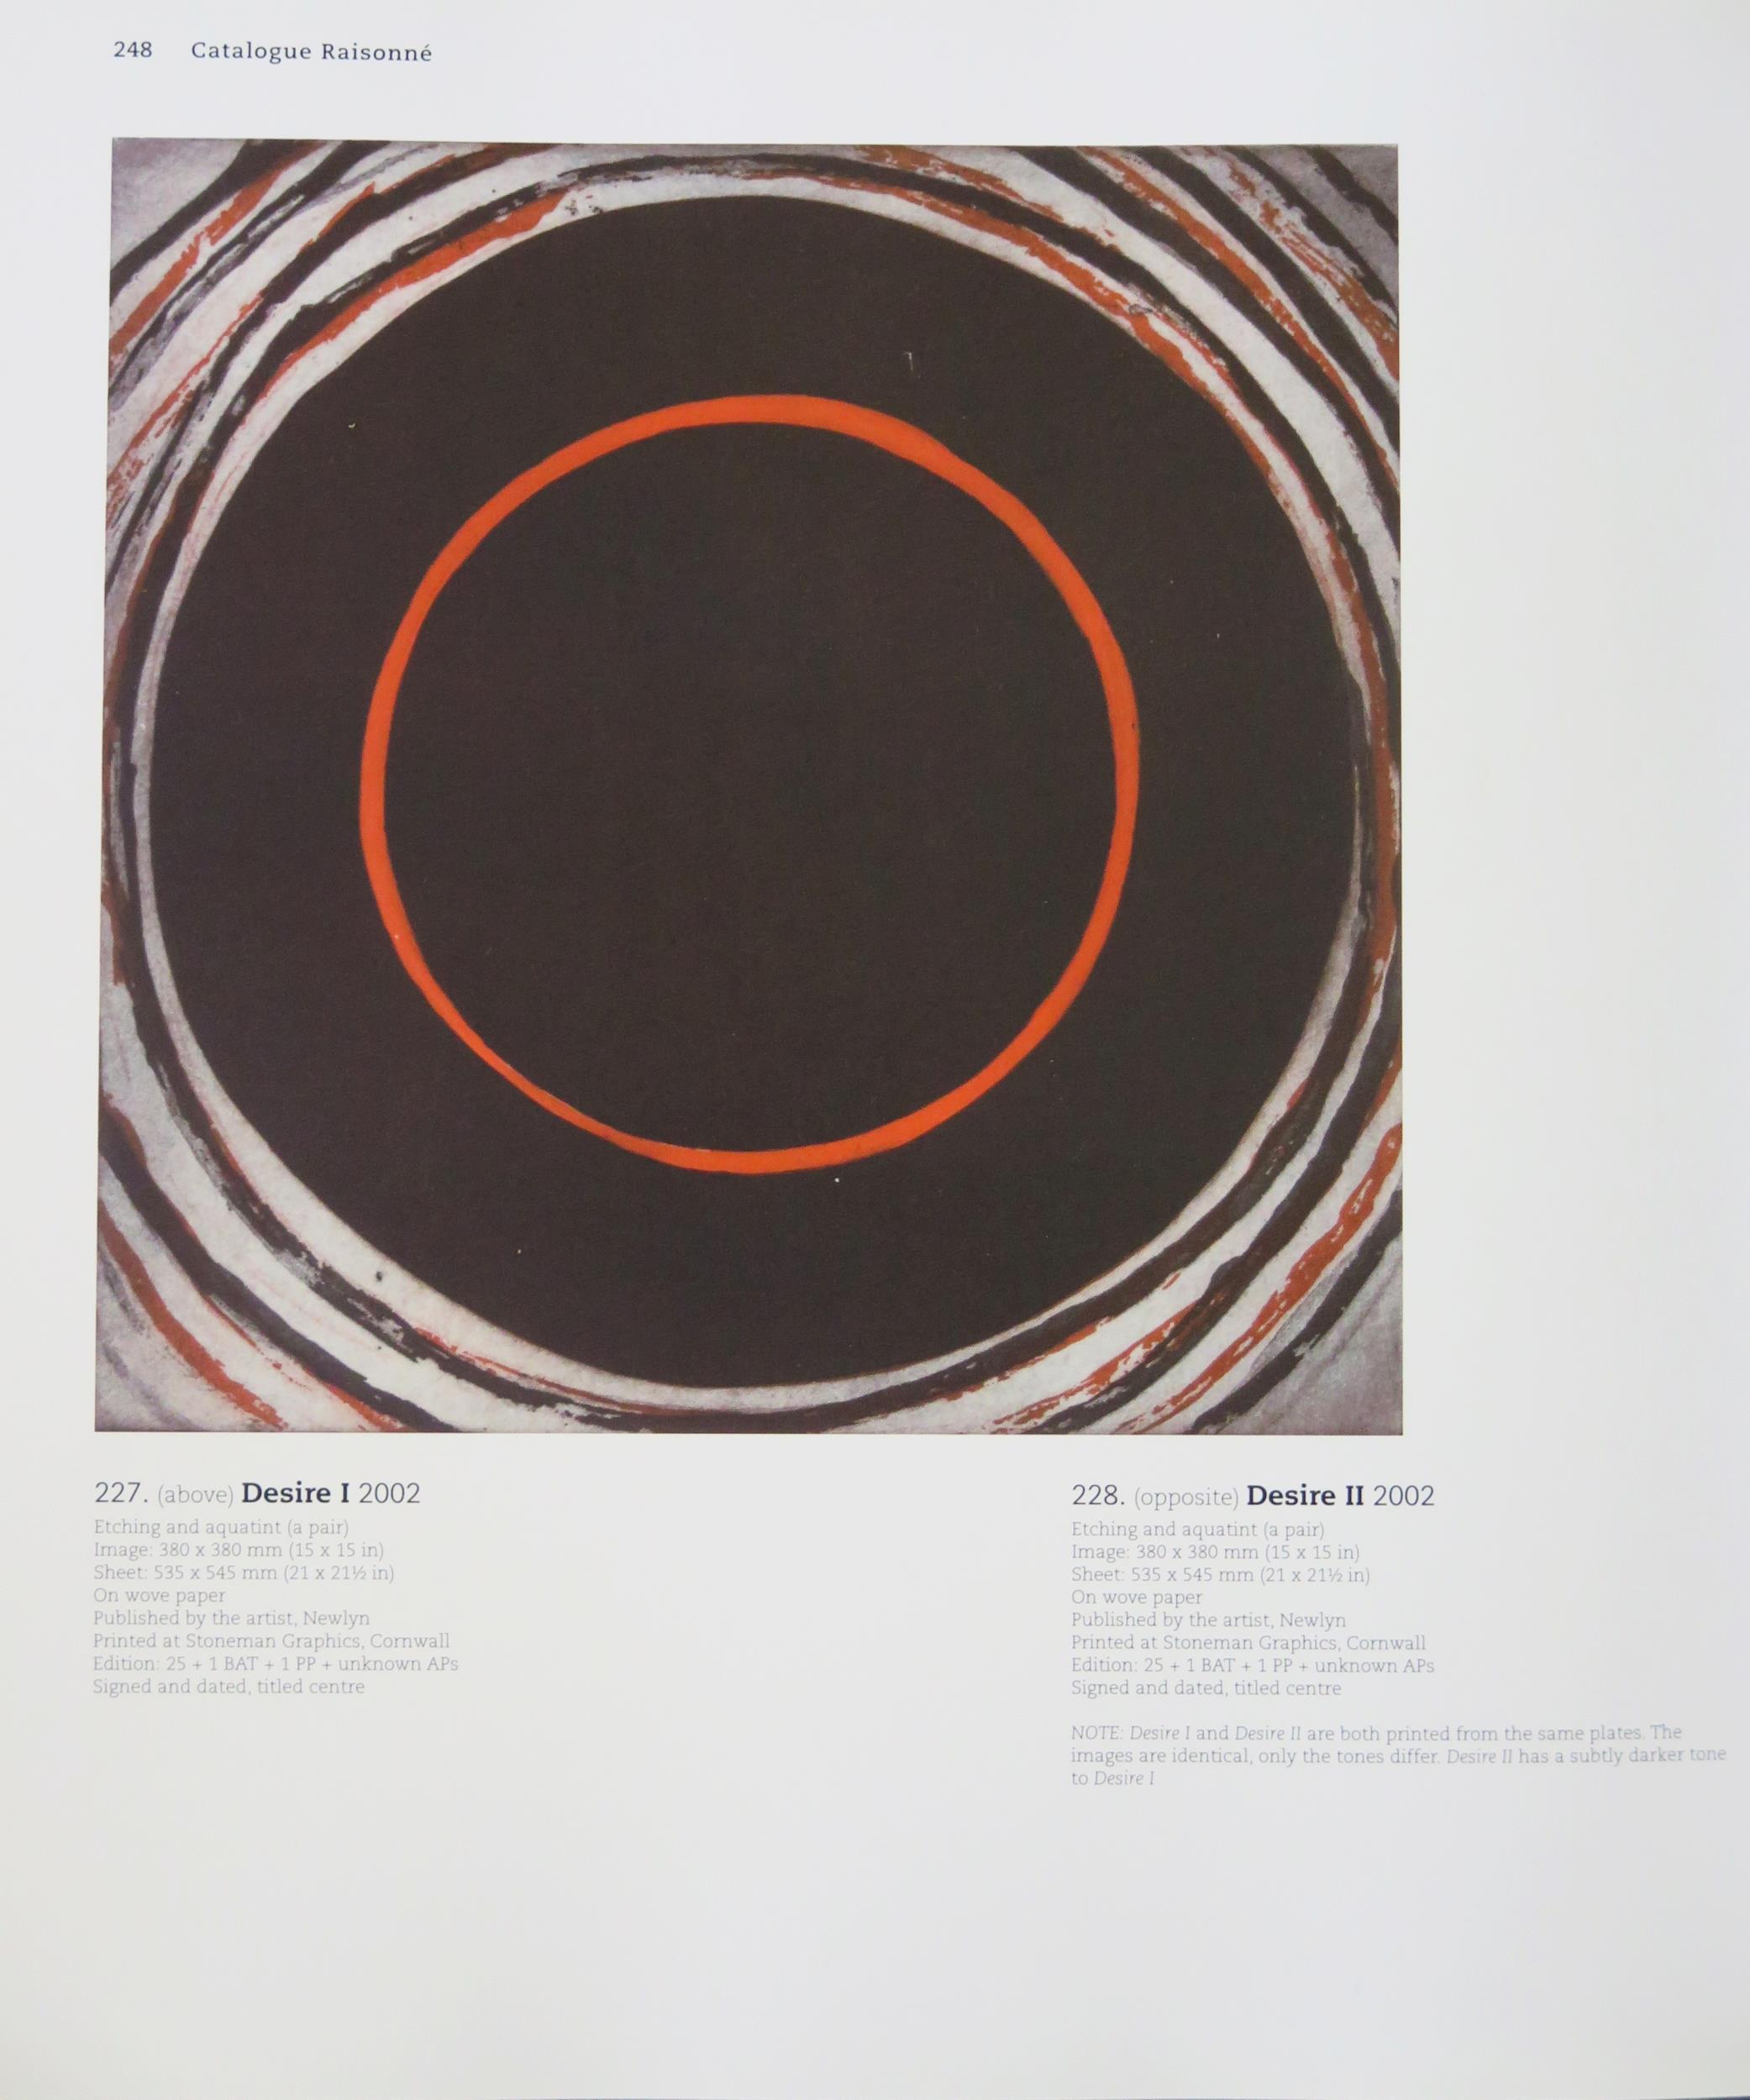 Terry Frost (1915 - 2003) RA, significant British abstract artist, St. Ives School, 'Desire I' 19/25 - Image 7 of 8